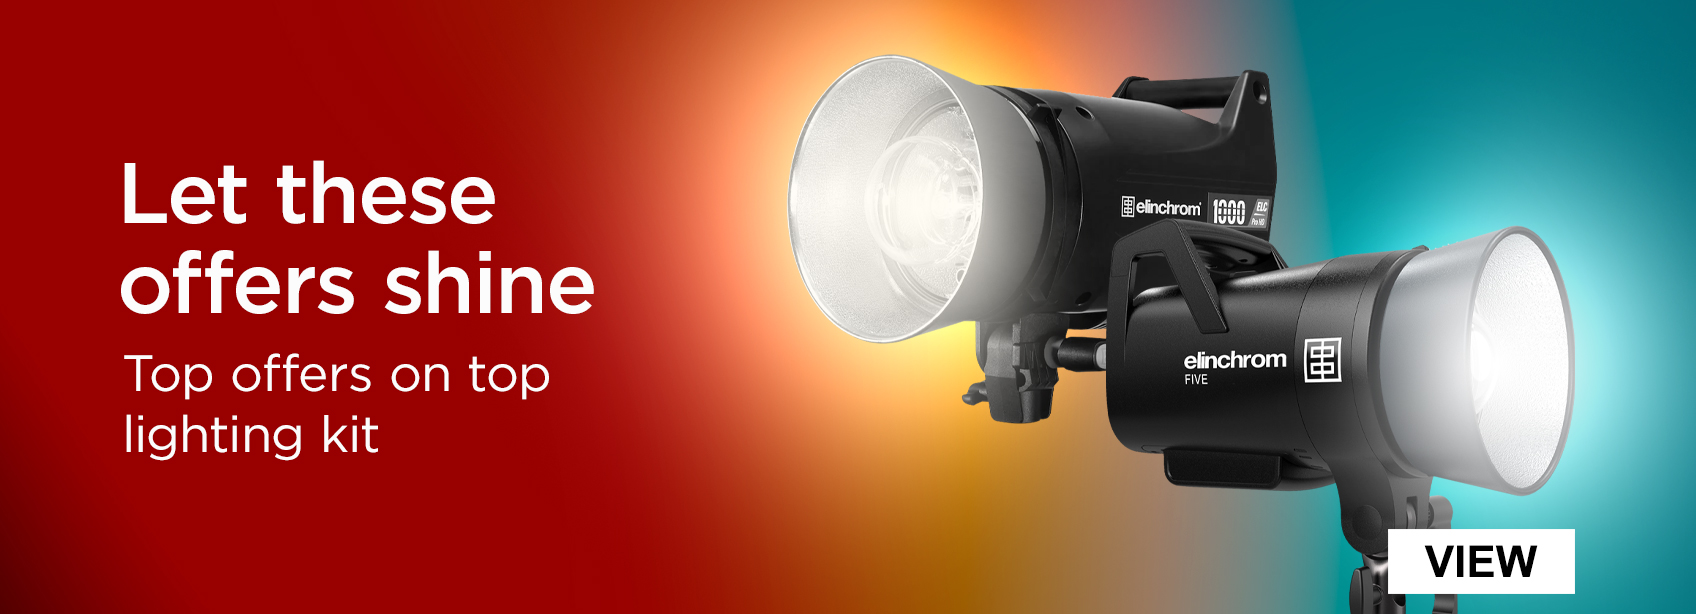 Let these offers shine. Top offers on top lighting kit